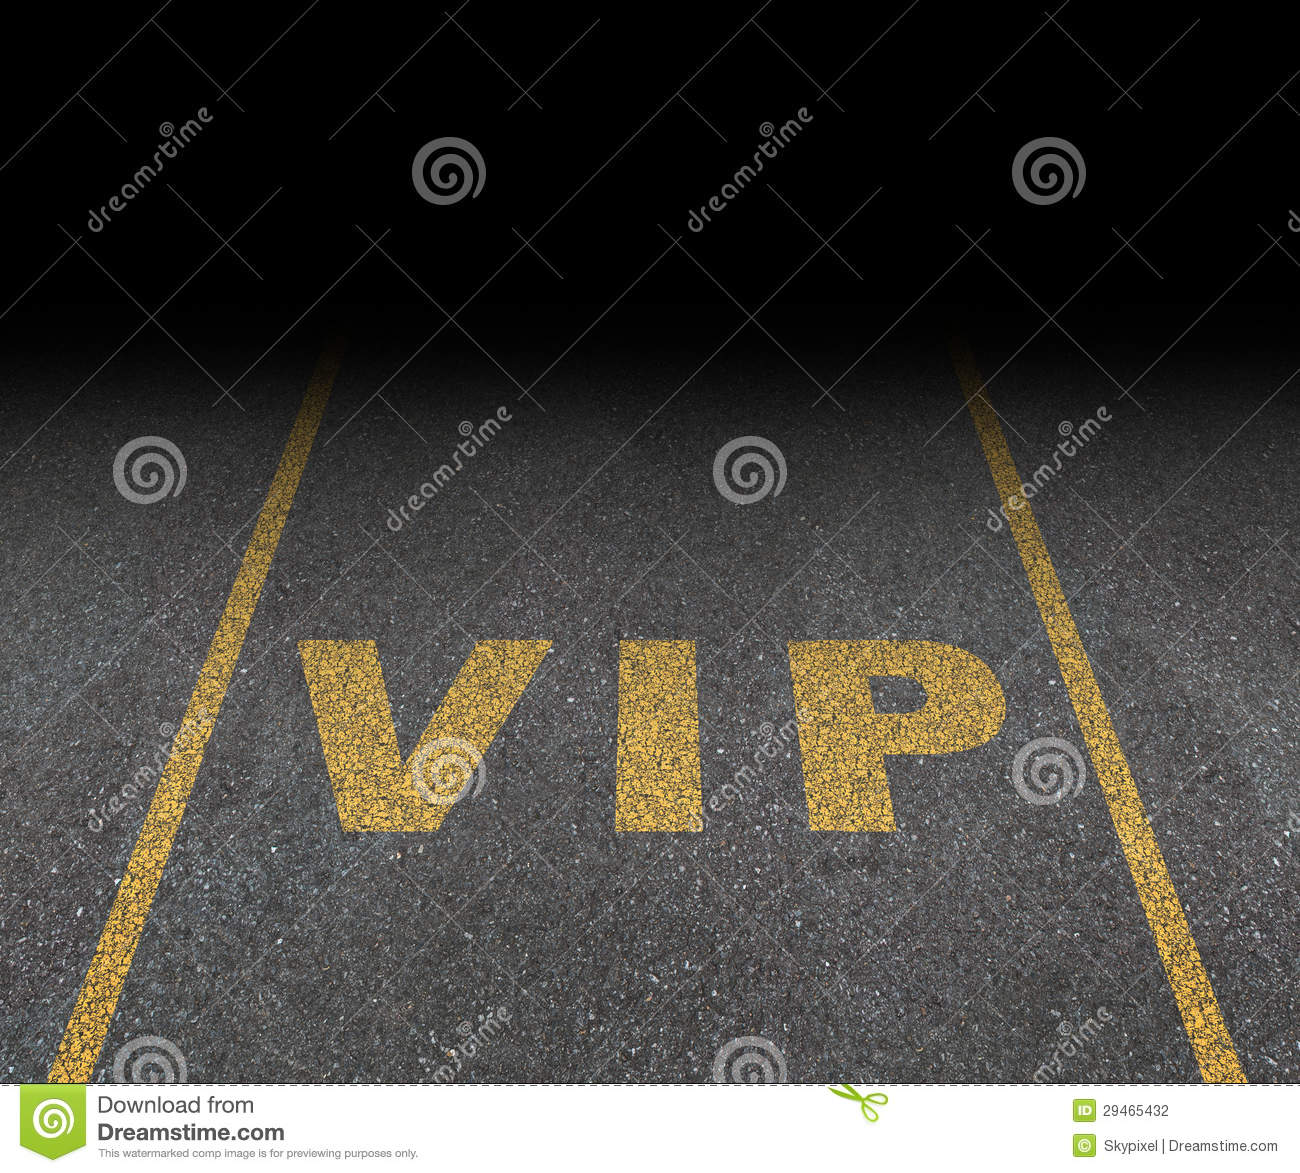 Vip Service Symbol With A First Class Reserved Parking Space For With